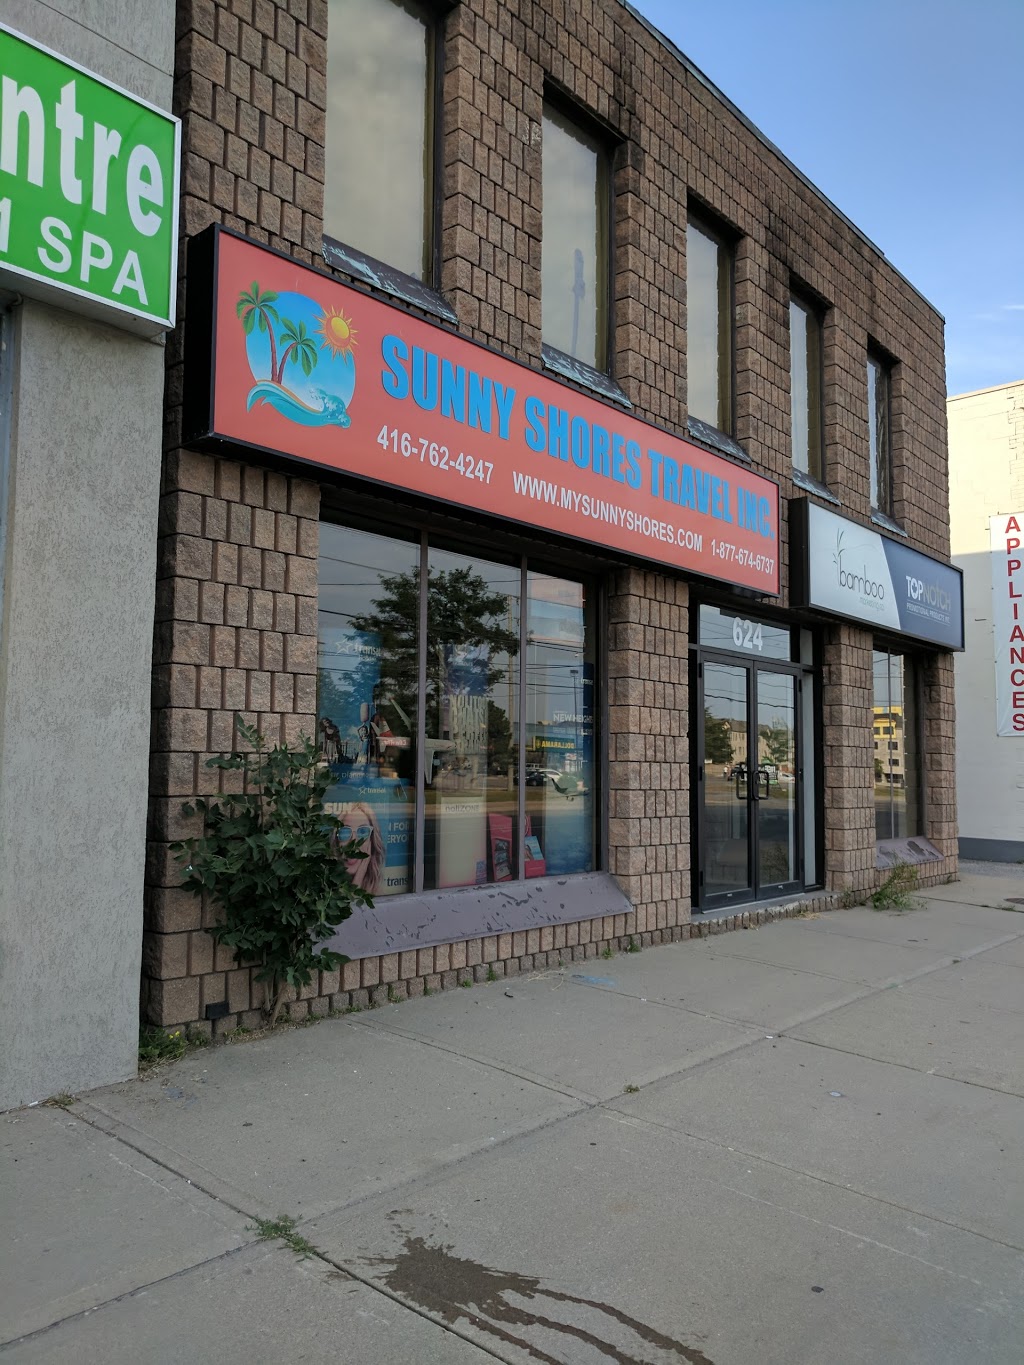 Sunny Shores Travel Inc | travel agency | 624 Lakeshore Rd E Unit 1, Mississauga, ON L5G 1J4, Canada | 4167624247 OR +1 416-762-4247